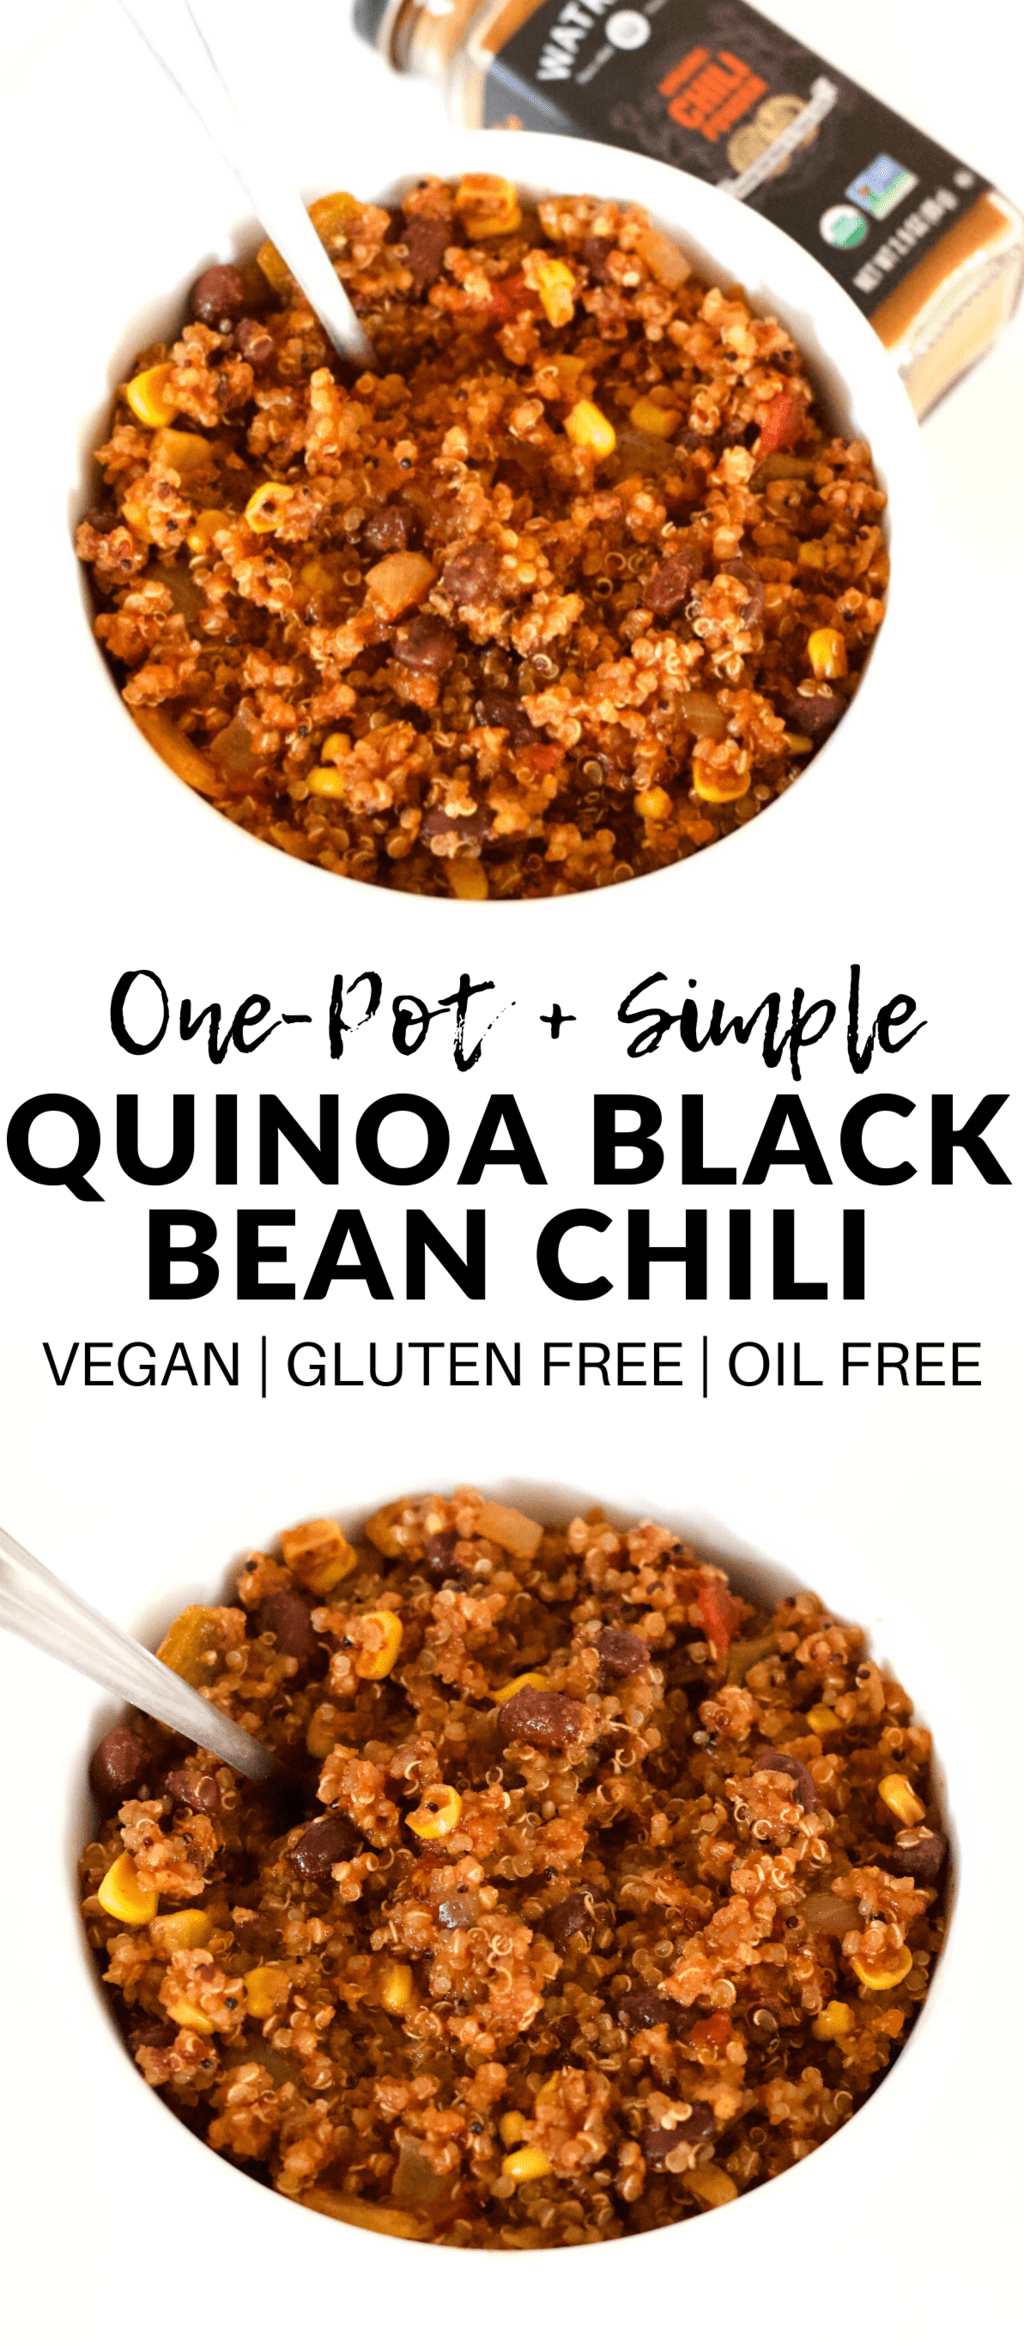 This One-Pot Quinoa Black Bean Chili is the perfect warm, cozy, and hearty meal for the holiday season! It is so easy to make - one pot and 30 minutes is all you need! This recipe is also ultra healthy and packed with nutrition - it’s vegan, gluten-free, oil-free, and absolutely delicious.